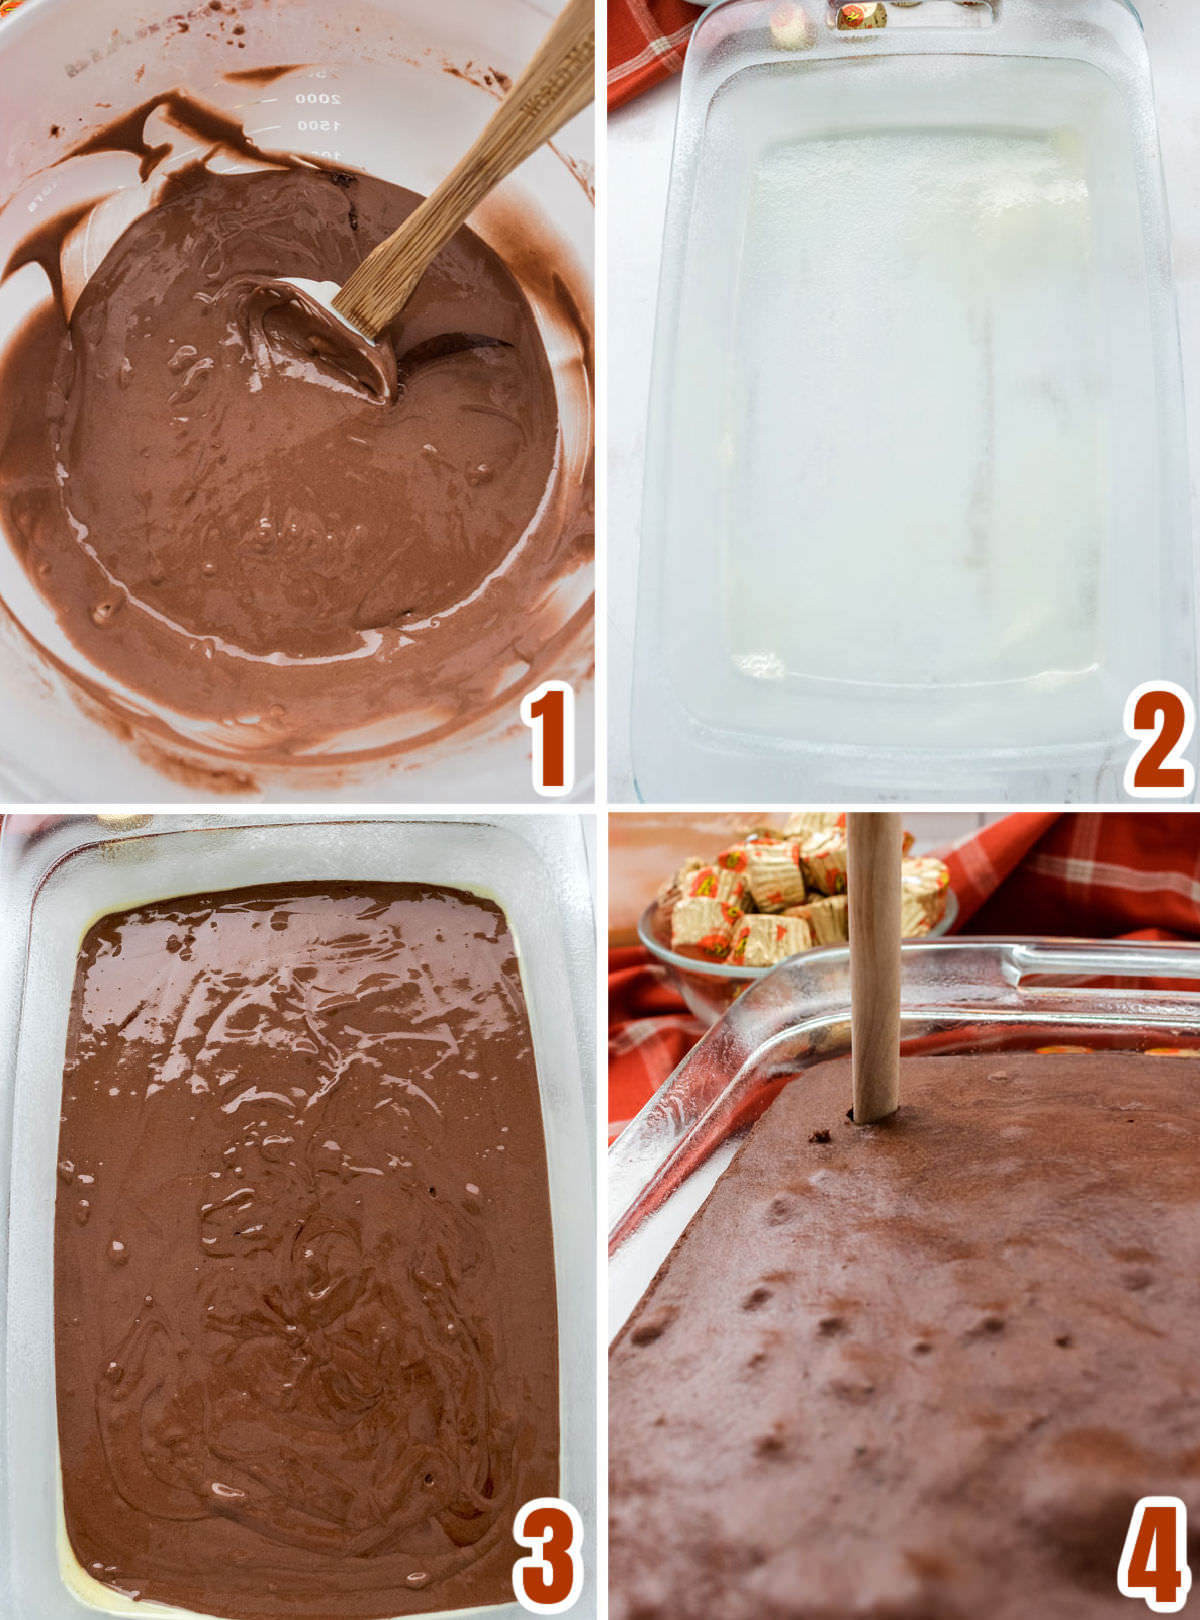 Collage image showing how to make the Chocolate cake in a 9x13" pan.